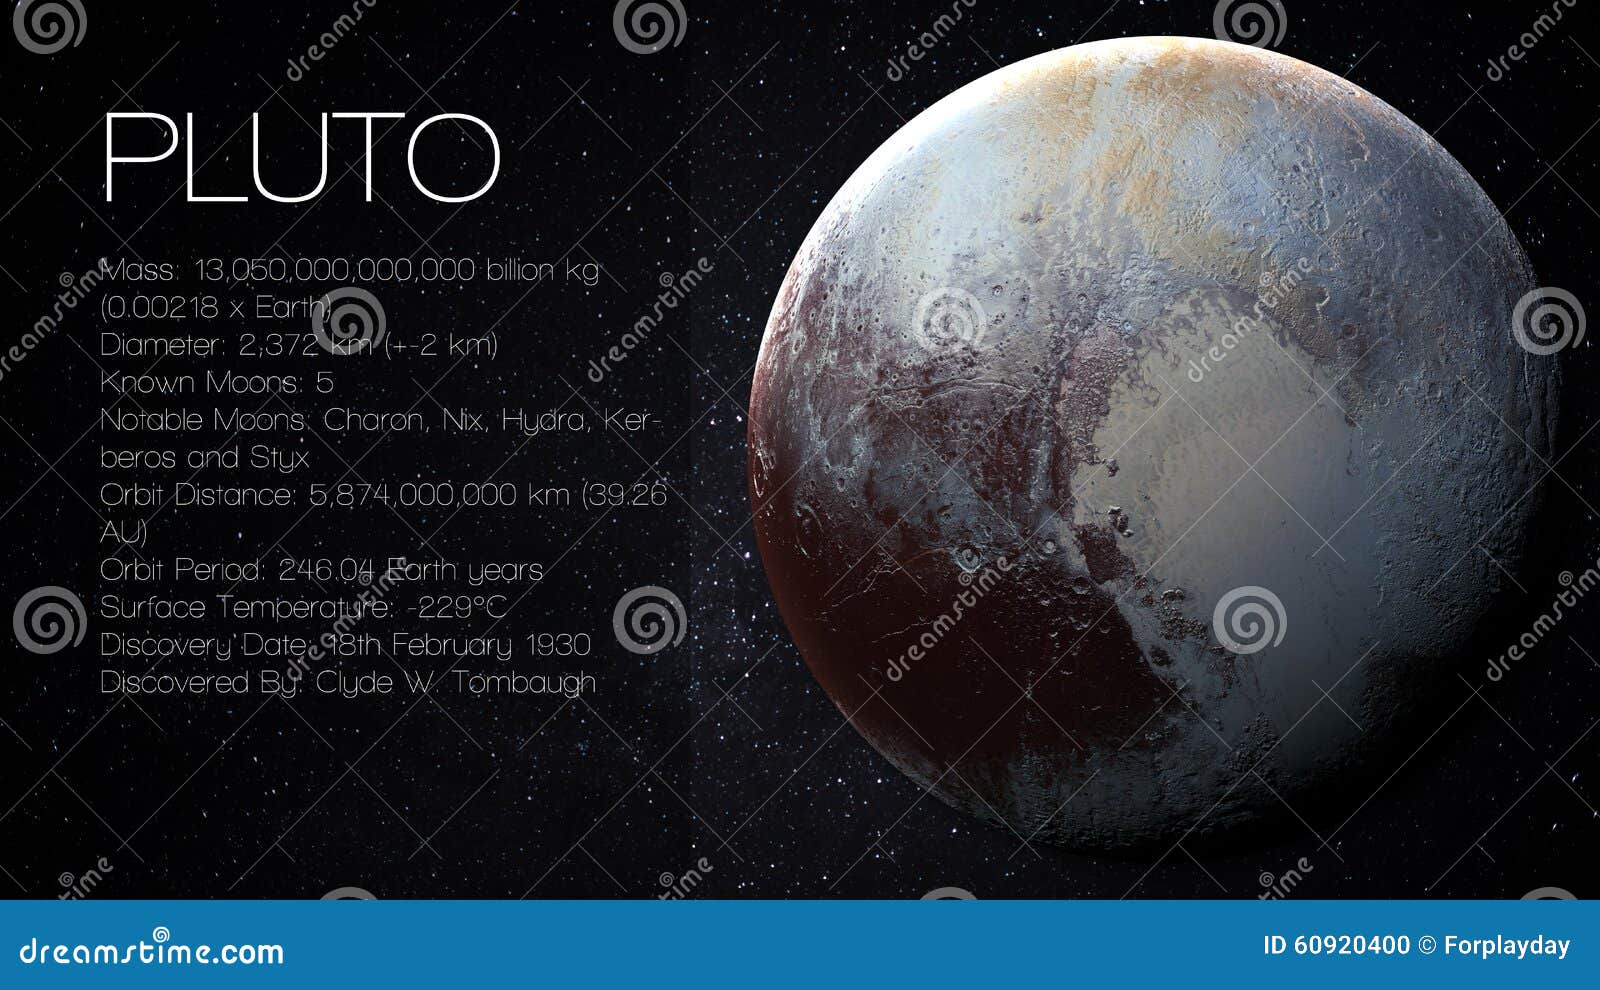 pluto - high resolution infographic presents one